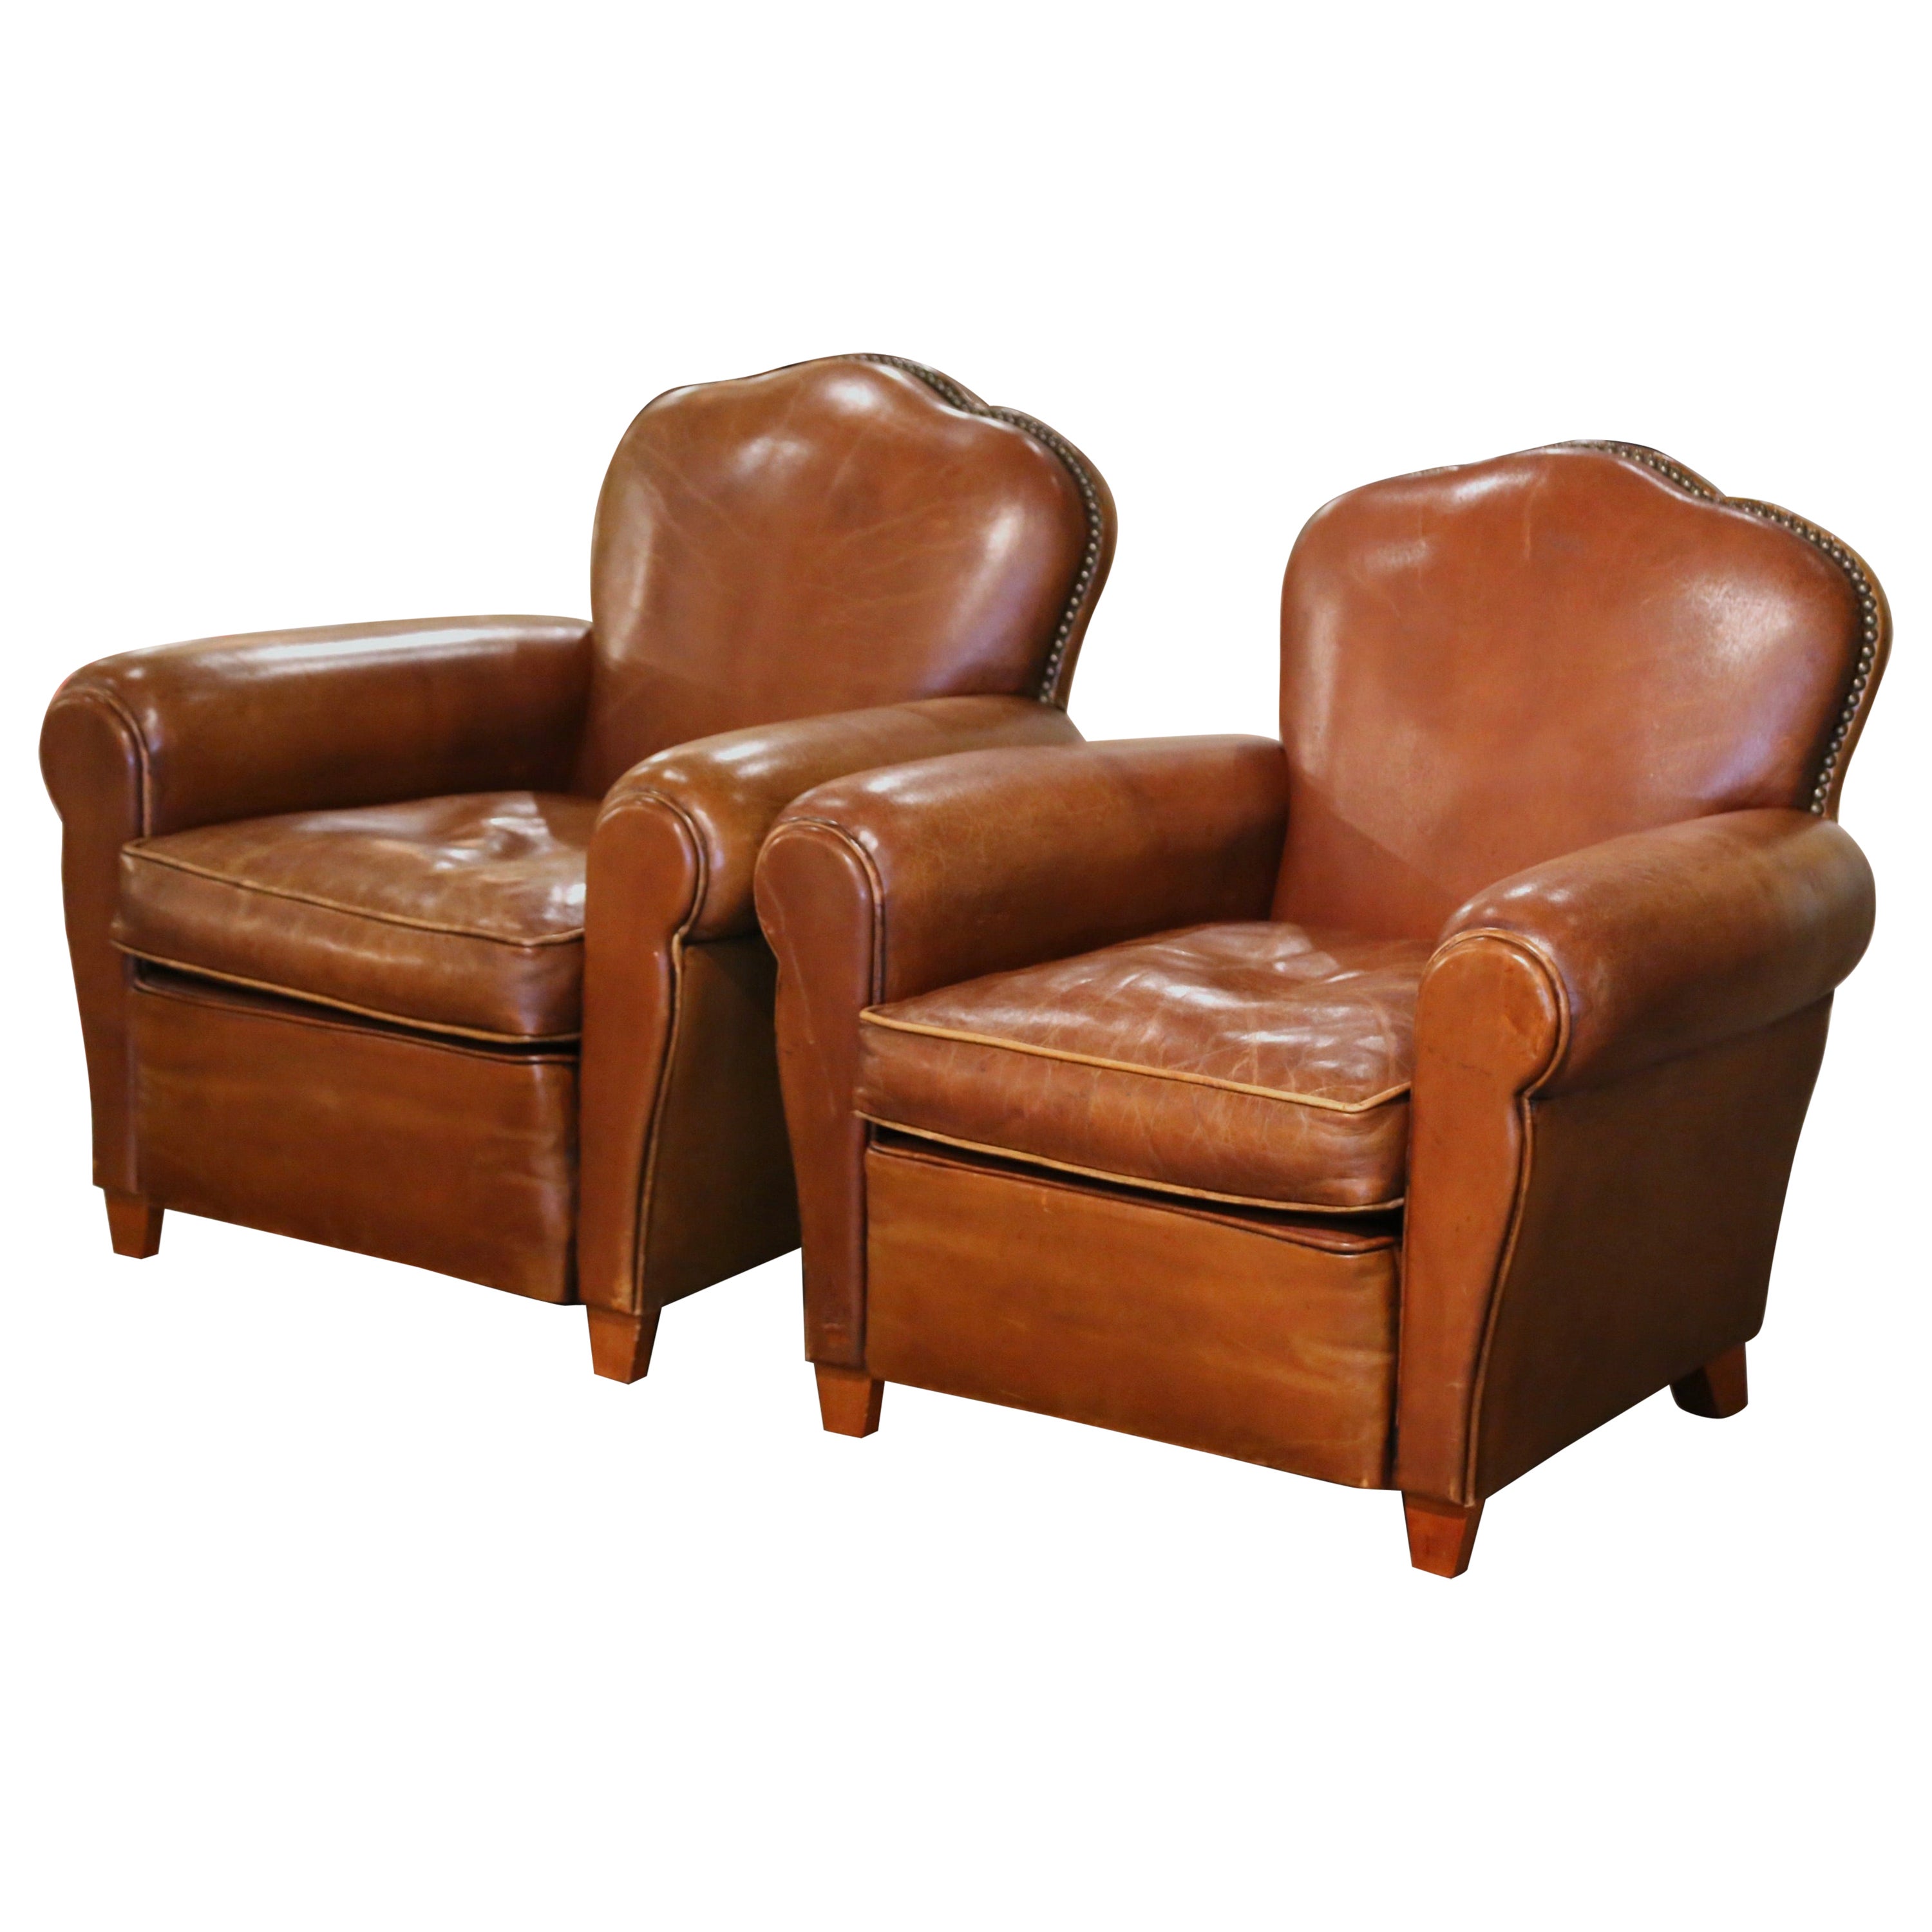 Pair of Midcentury French Art Deco Club Armchairs with Original Brown Leather